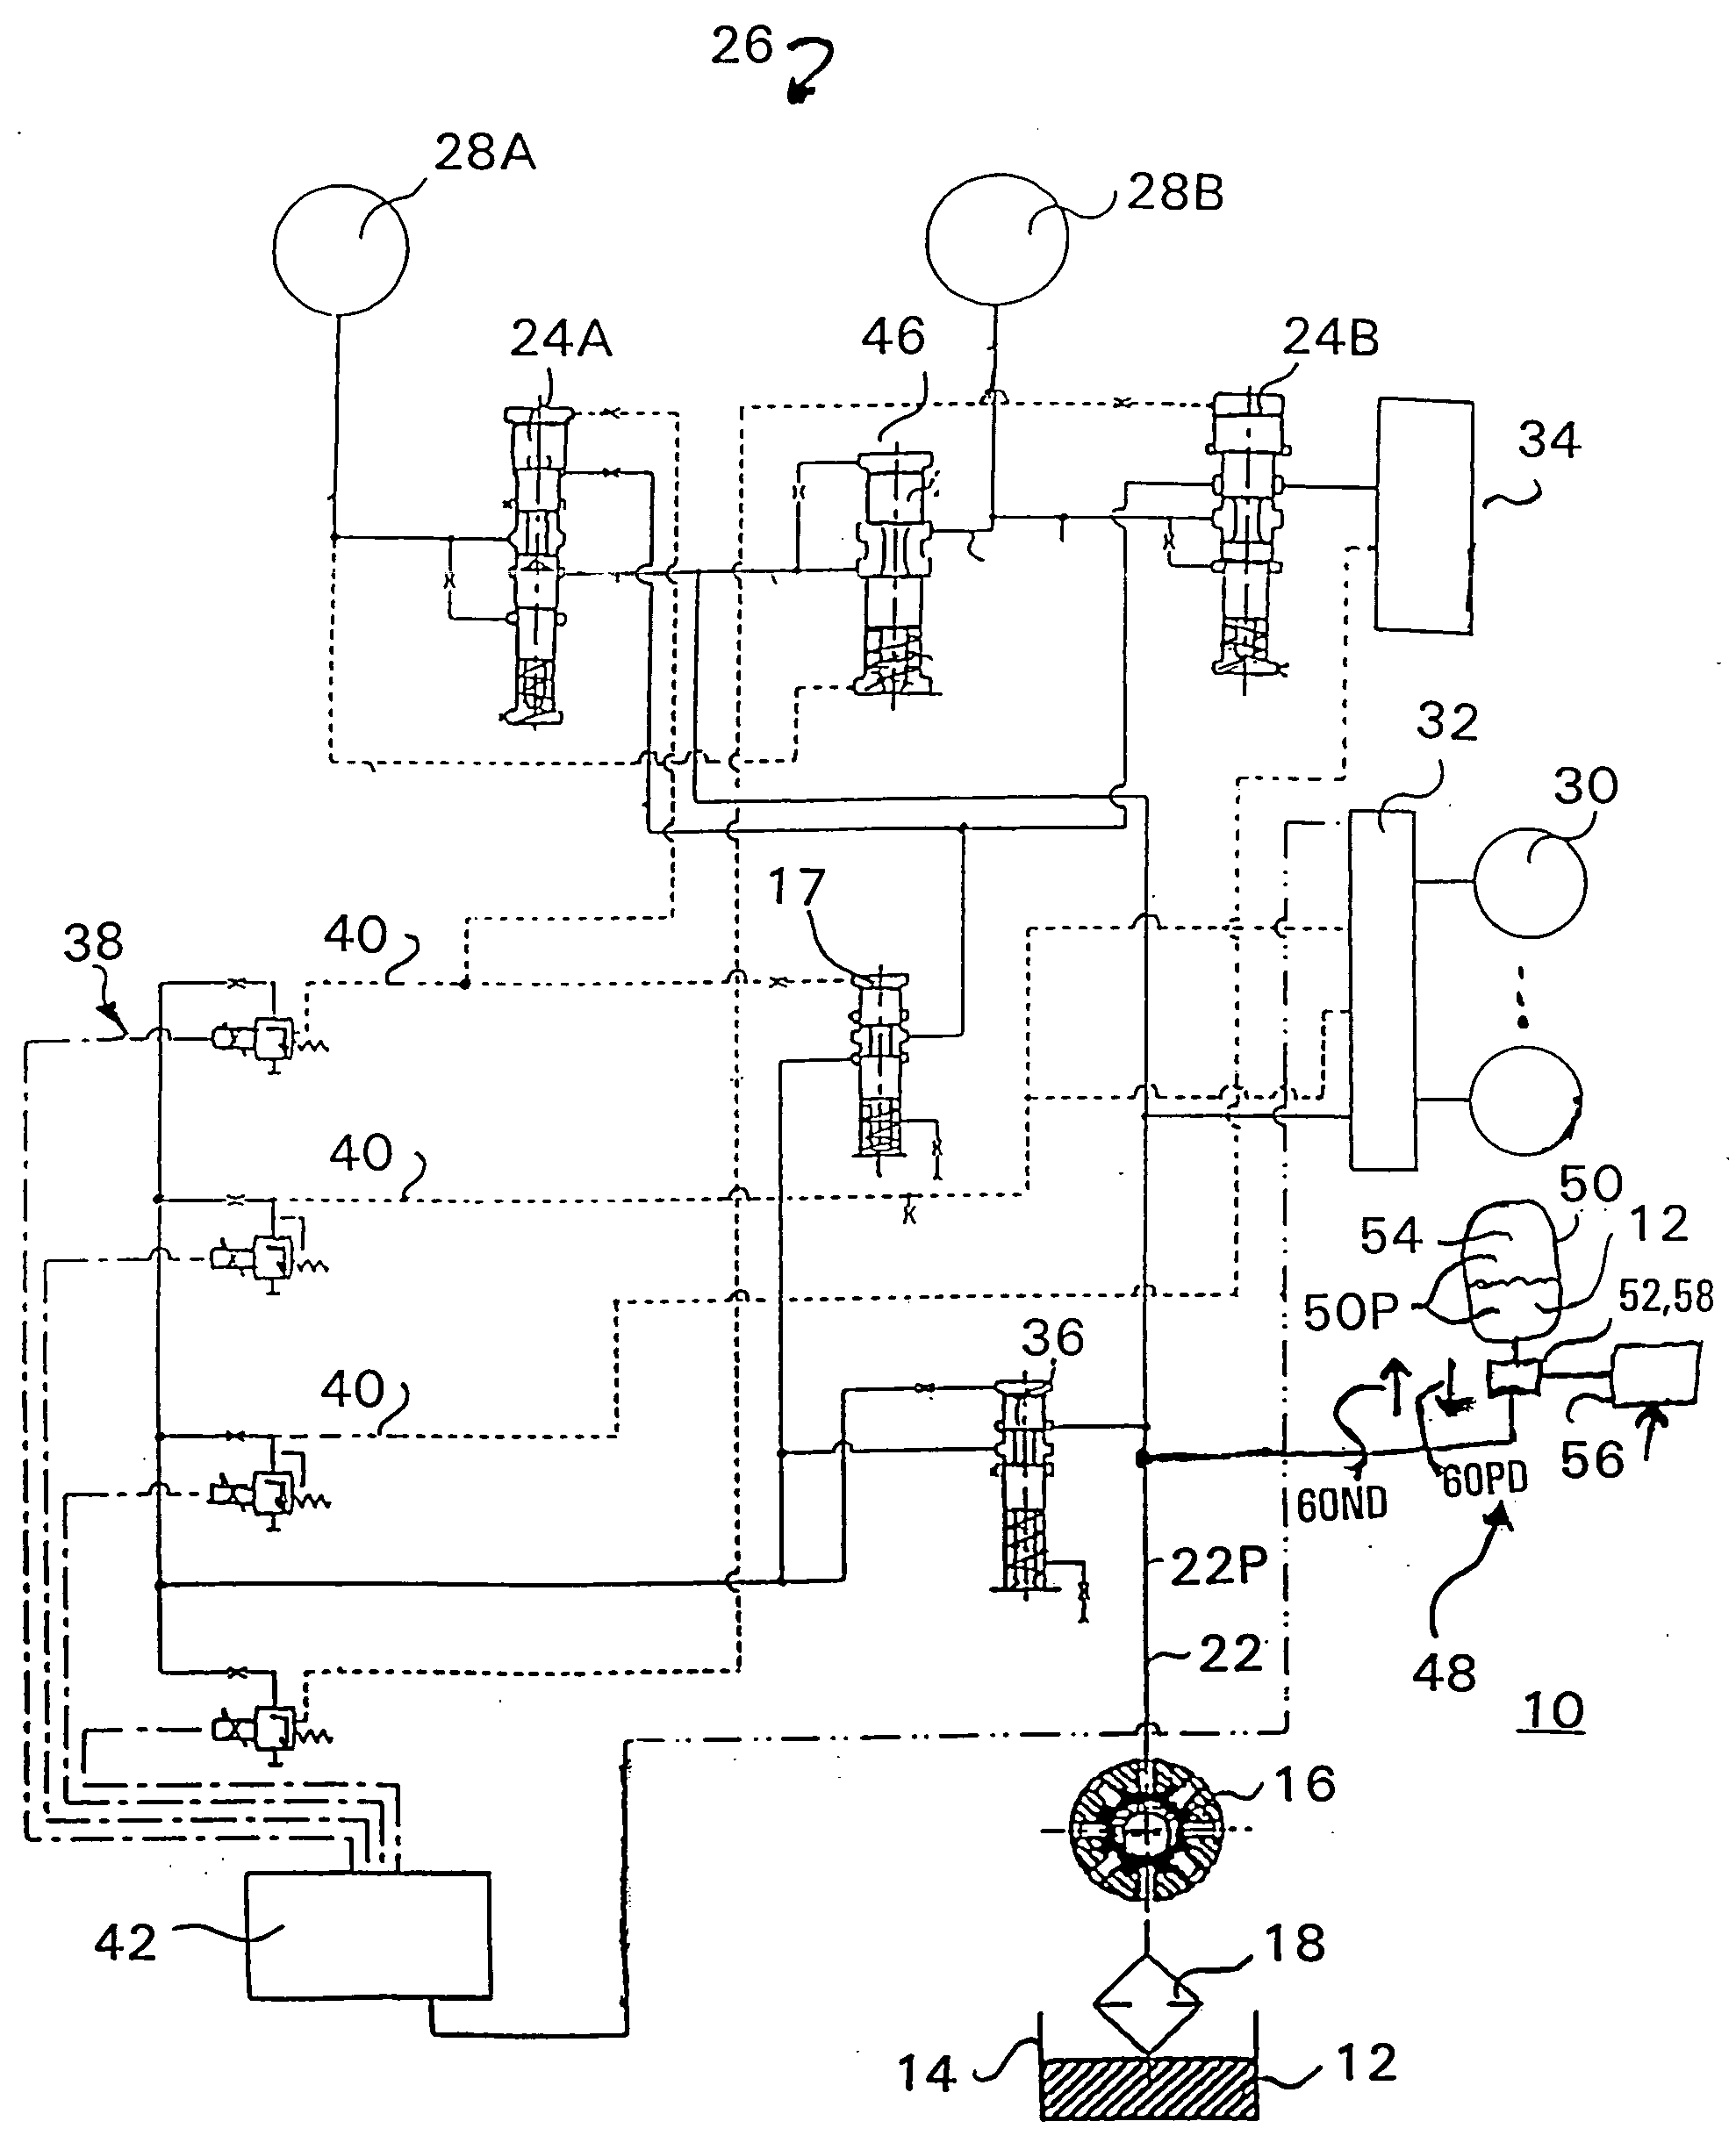 Method and apparatus for maintaining hydraulic pressure when a vehicle is stopped